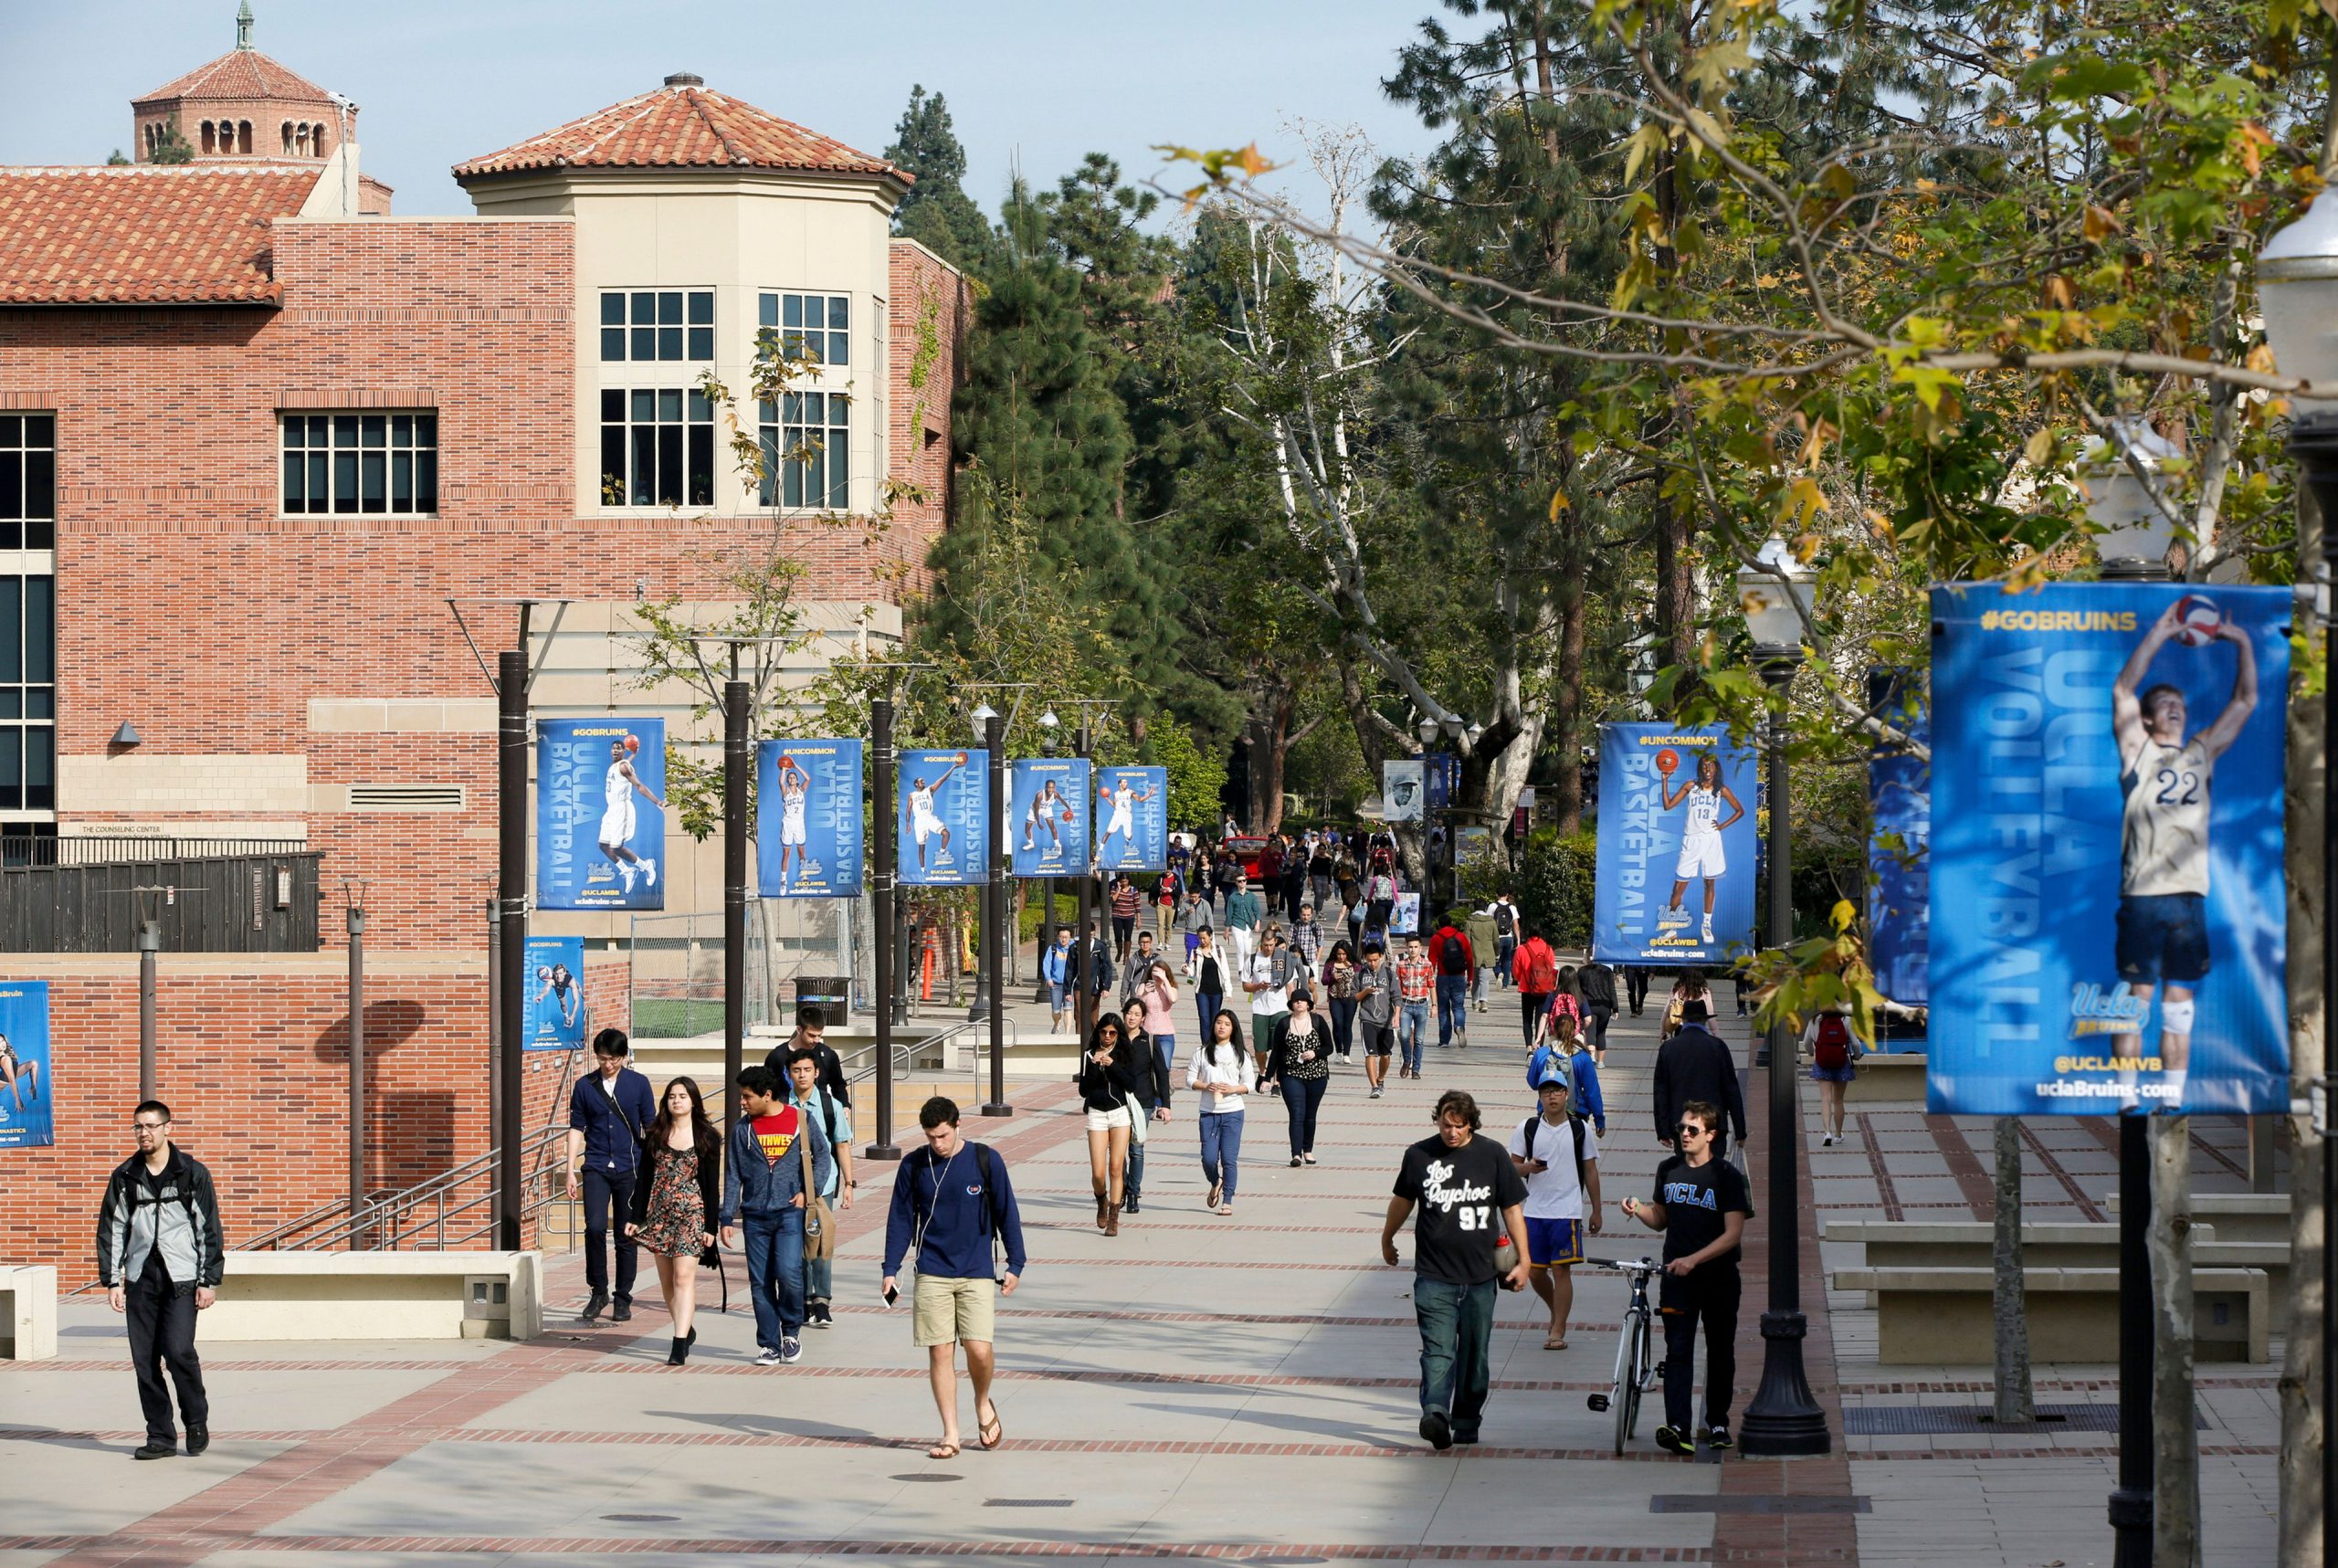 Matthew Christopher Harris, man who threatened UCLA and other colleges, arrested